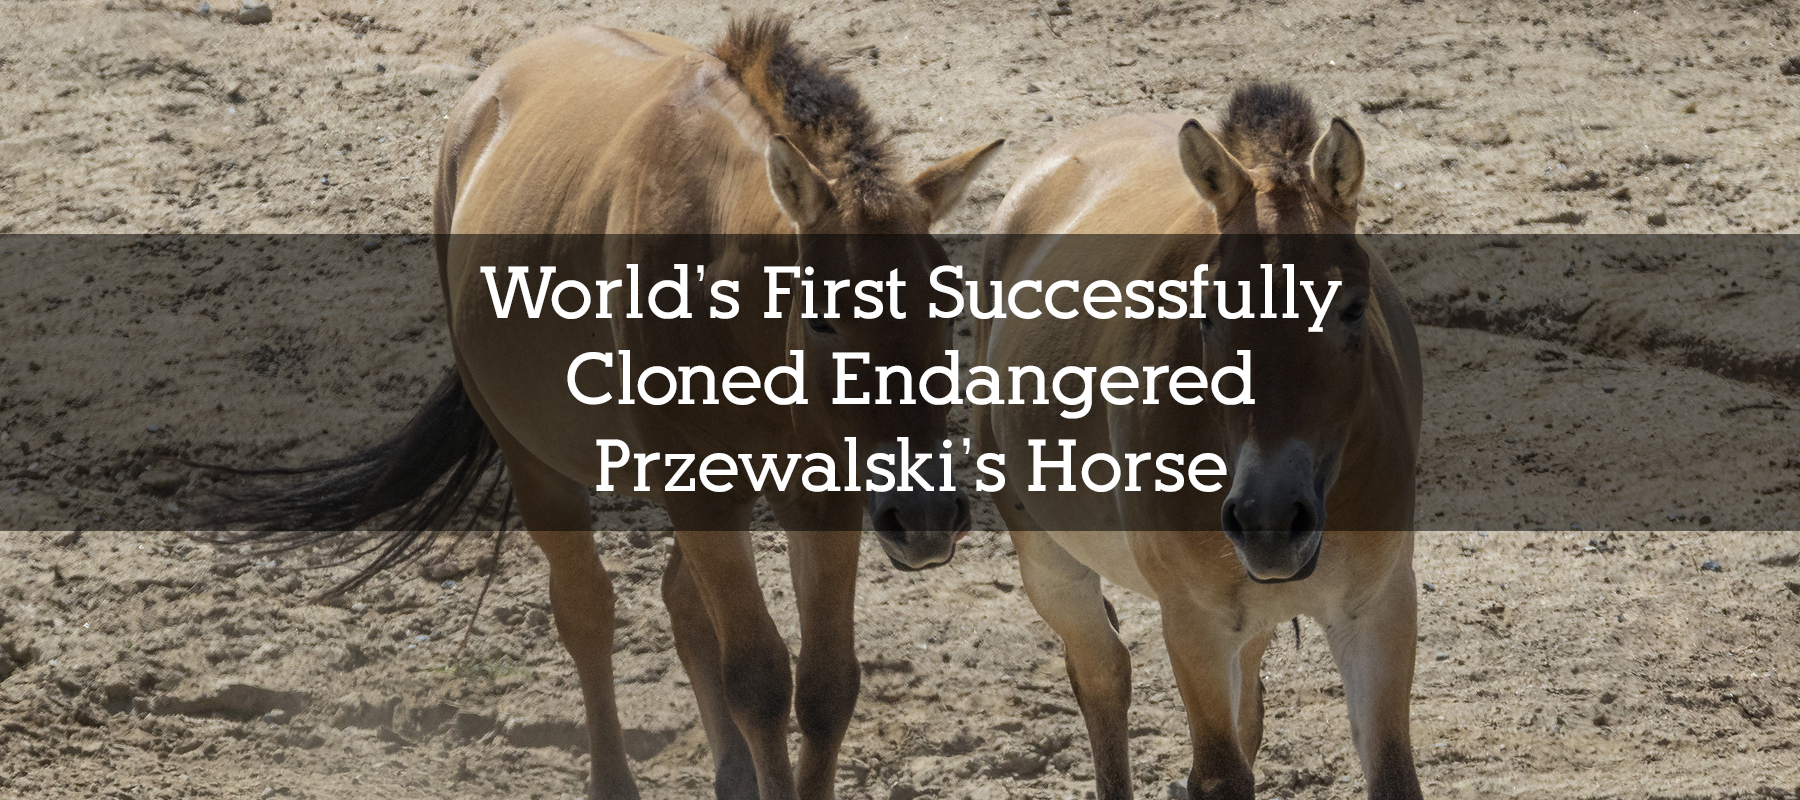 World’s First Successfully Cloned Endangered Przewalski’s Horse Now Learning the Language of Wild Horses